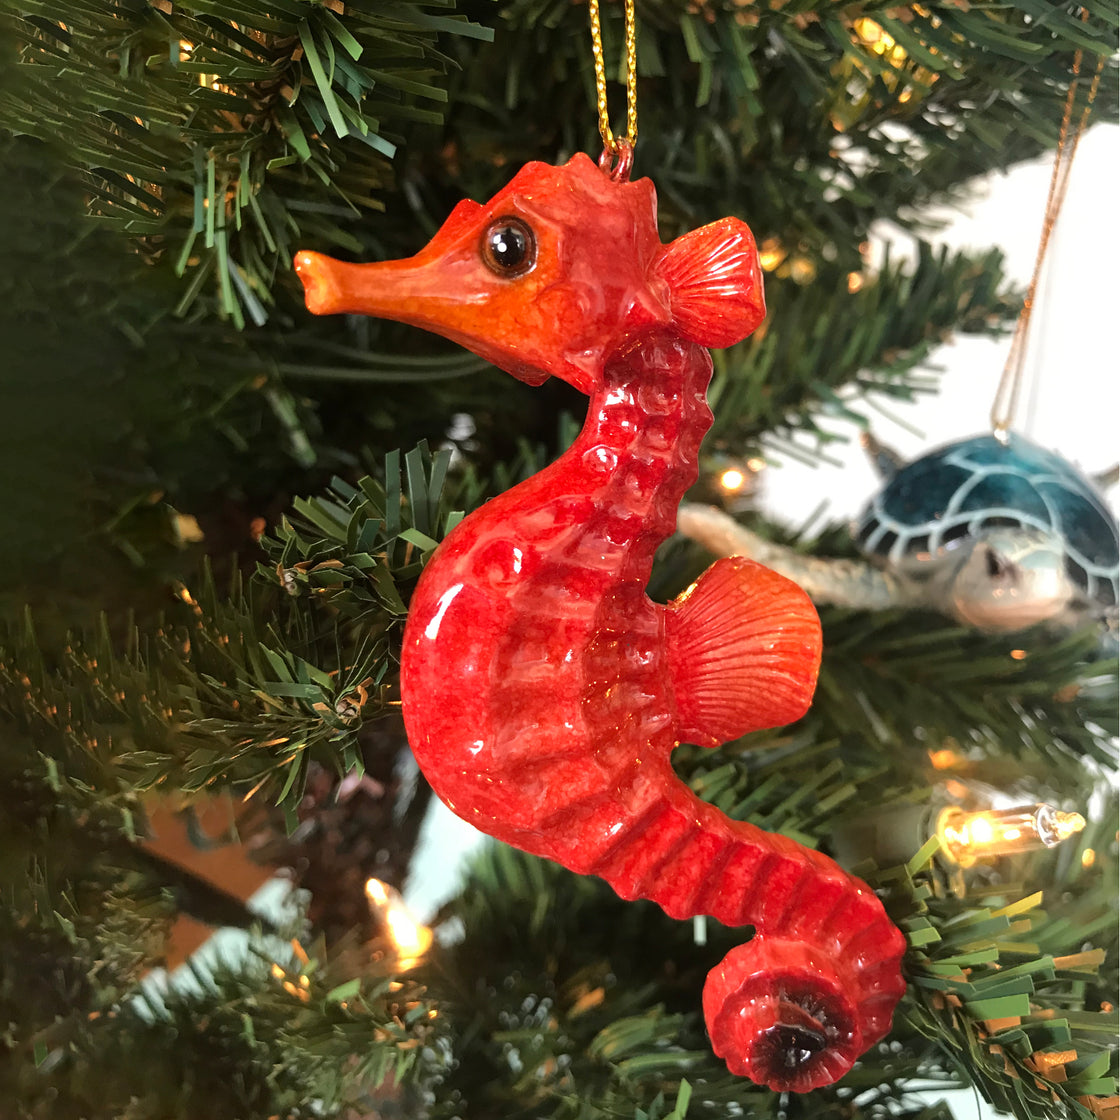 adorable hand-painted red seahorse ornament hanging on Christmas tree with lights